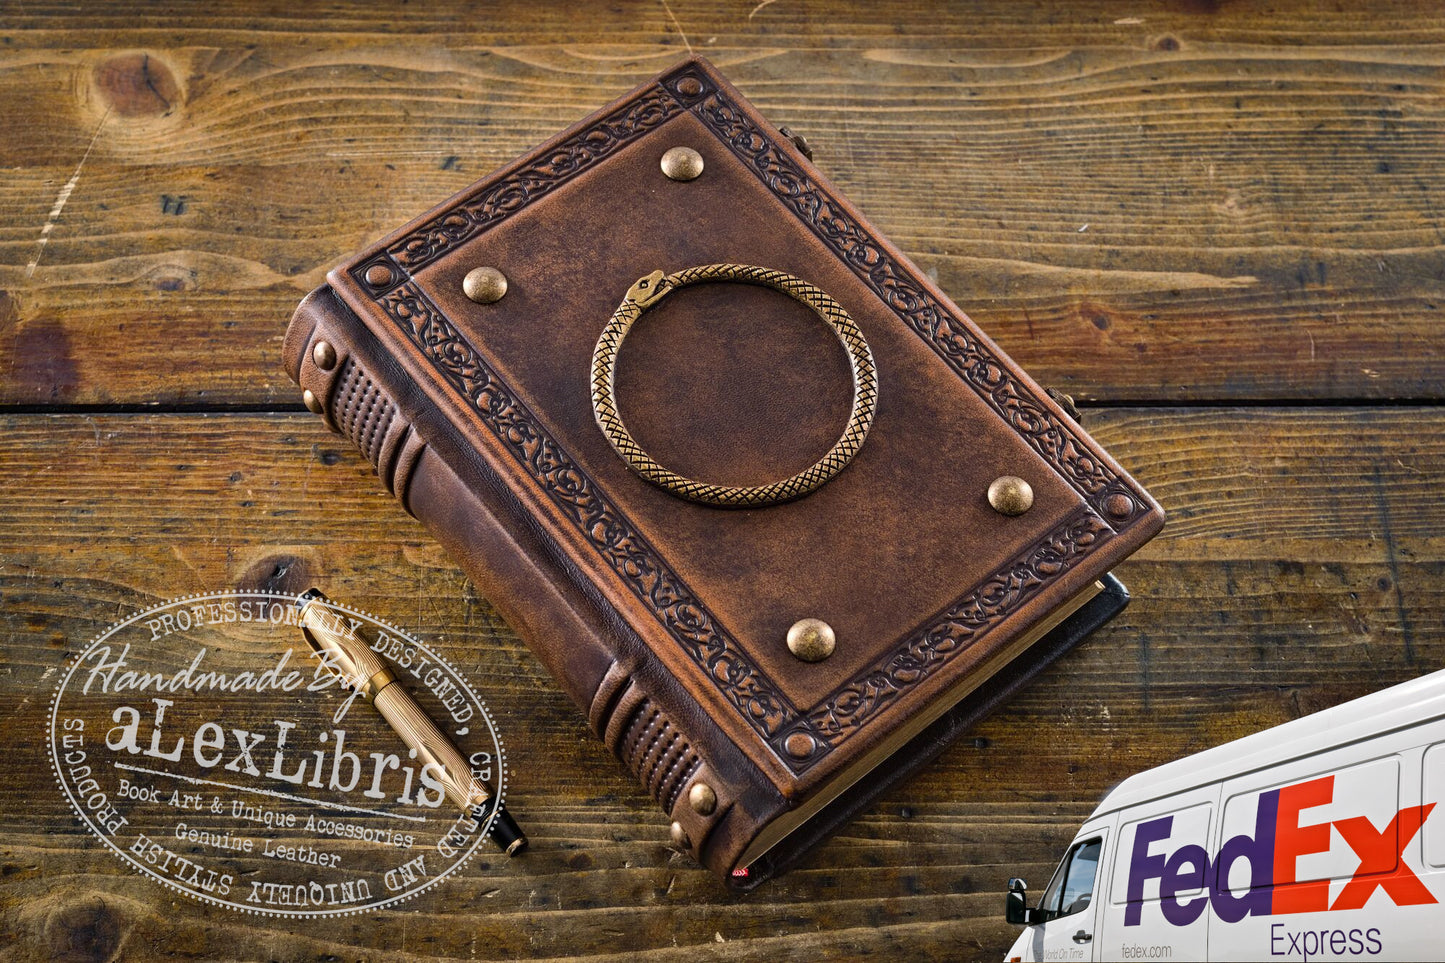 Ouroboros Leather Journal: Large 7.5 x 10 Inches, 600 Blank Pages - Embrace the Eternal Cycle with this Antiqued Leather Journal